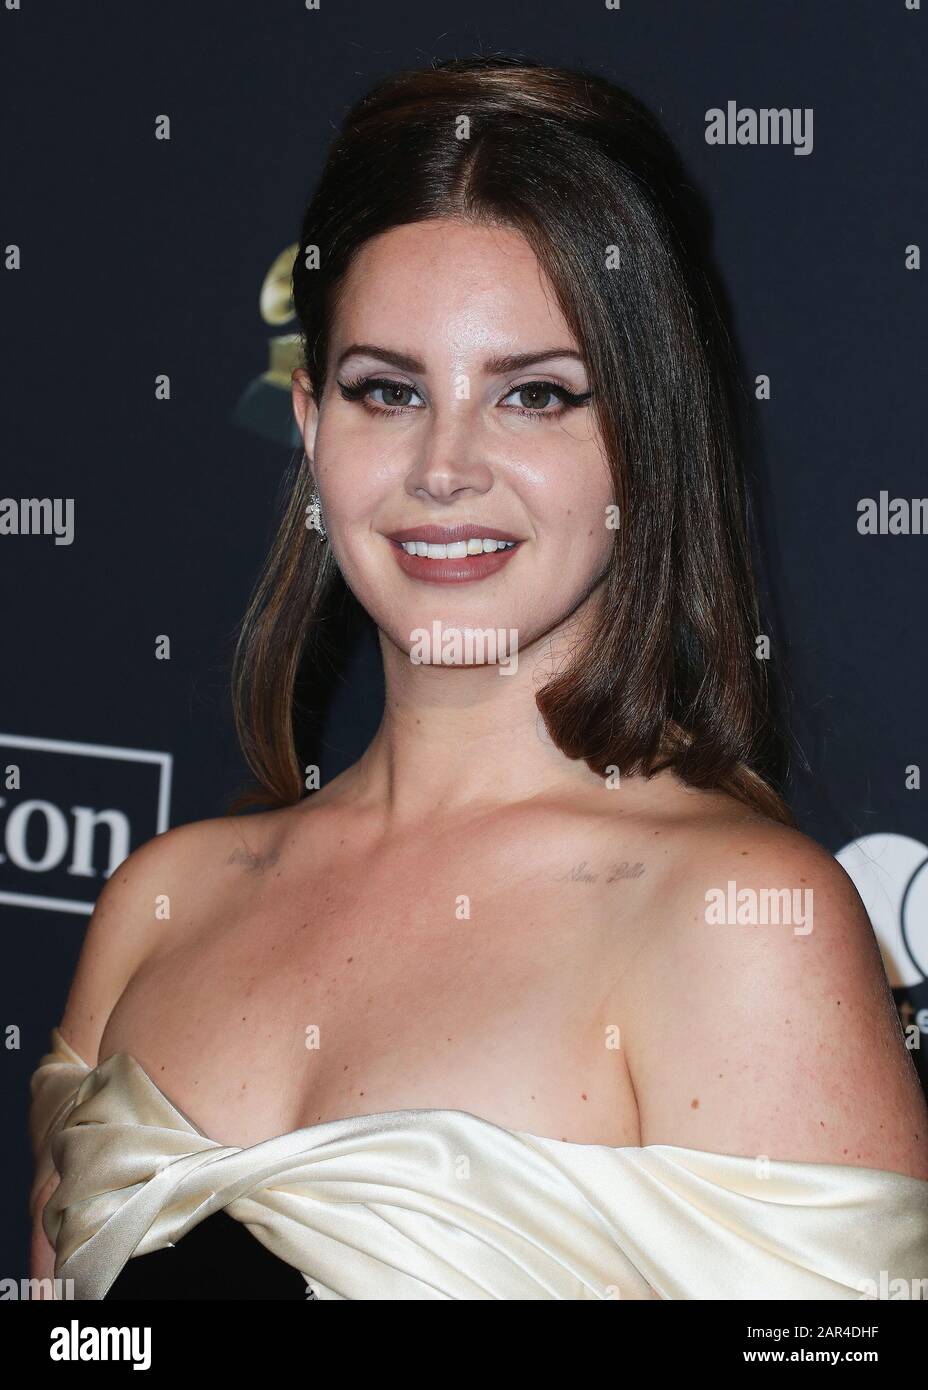 Beverly Hills, United States. 25th Jan, 2020. BEVERLY HILLS, LOS ANGELES, CALIFORNIA, USA - JANUARY 25: Lana Del Rey arrives at The Recording Academy And Clive Davis' 2020 Pre-GRAMMY Gala held at The Beverly Hilton Hotel on January 25, 2020 in Beverly Hills, Los Angeles, California, United States. (Photo by Xavier Collin/Image Press Agency) Credit: Image Press Agency/Alamy Live News Stock Photo